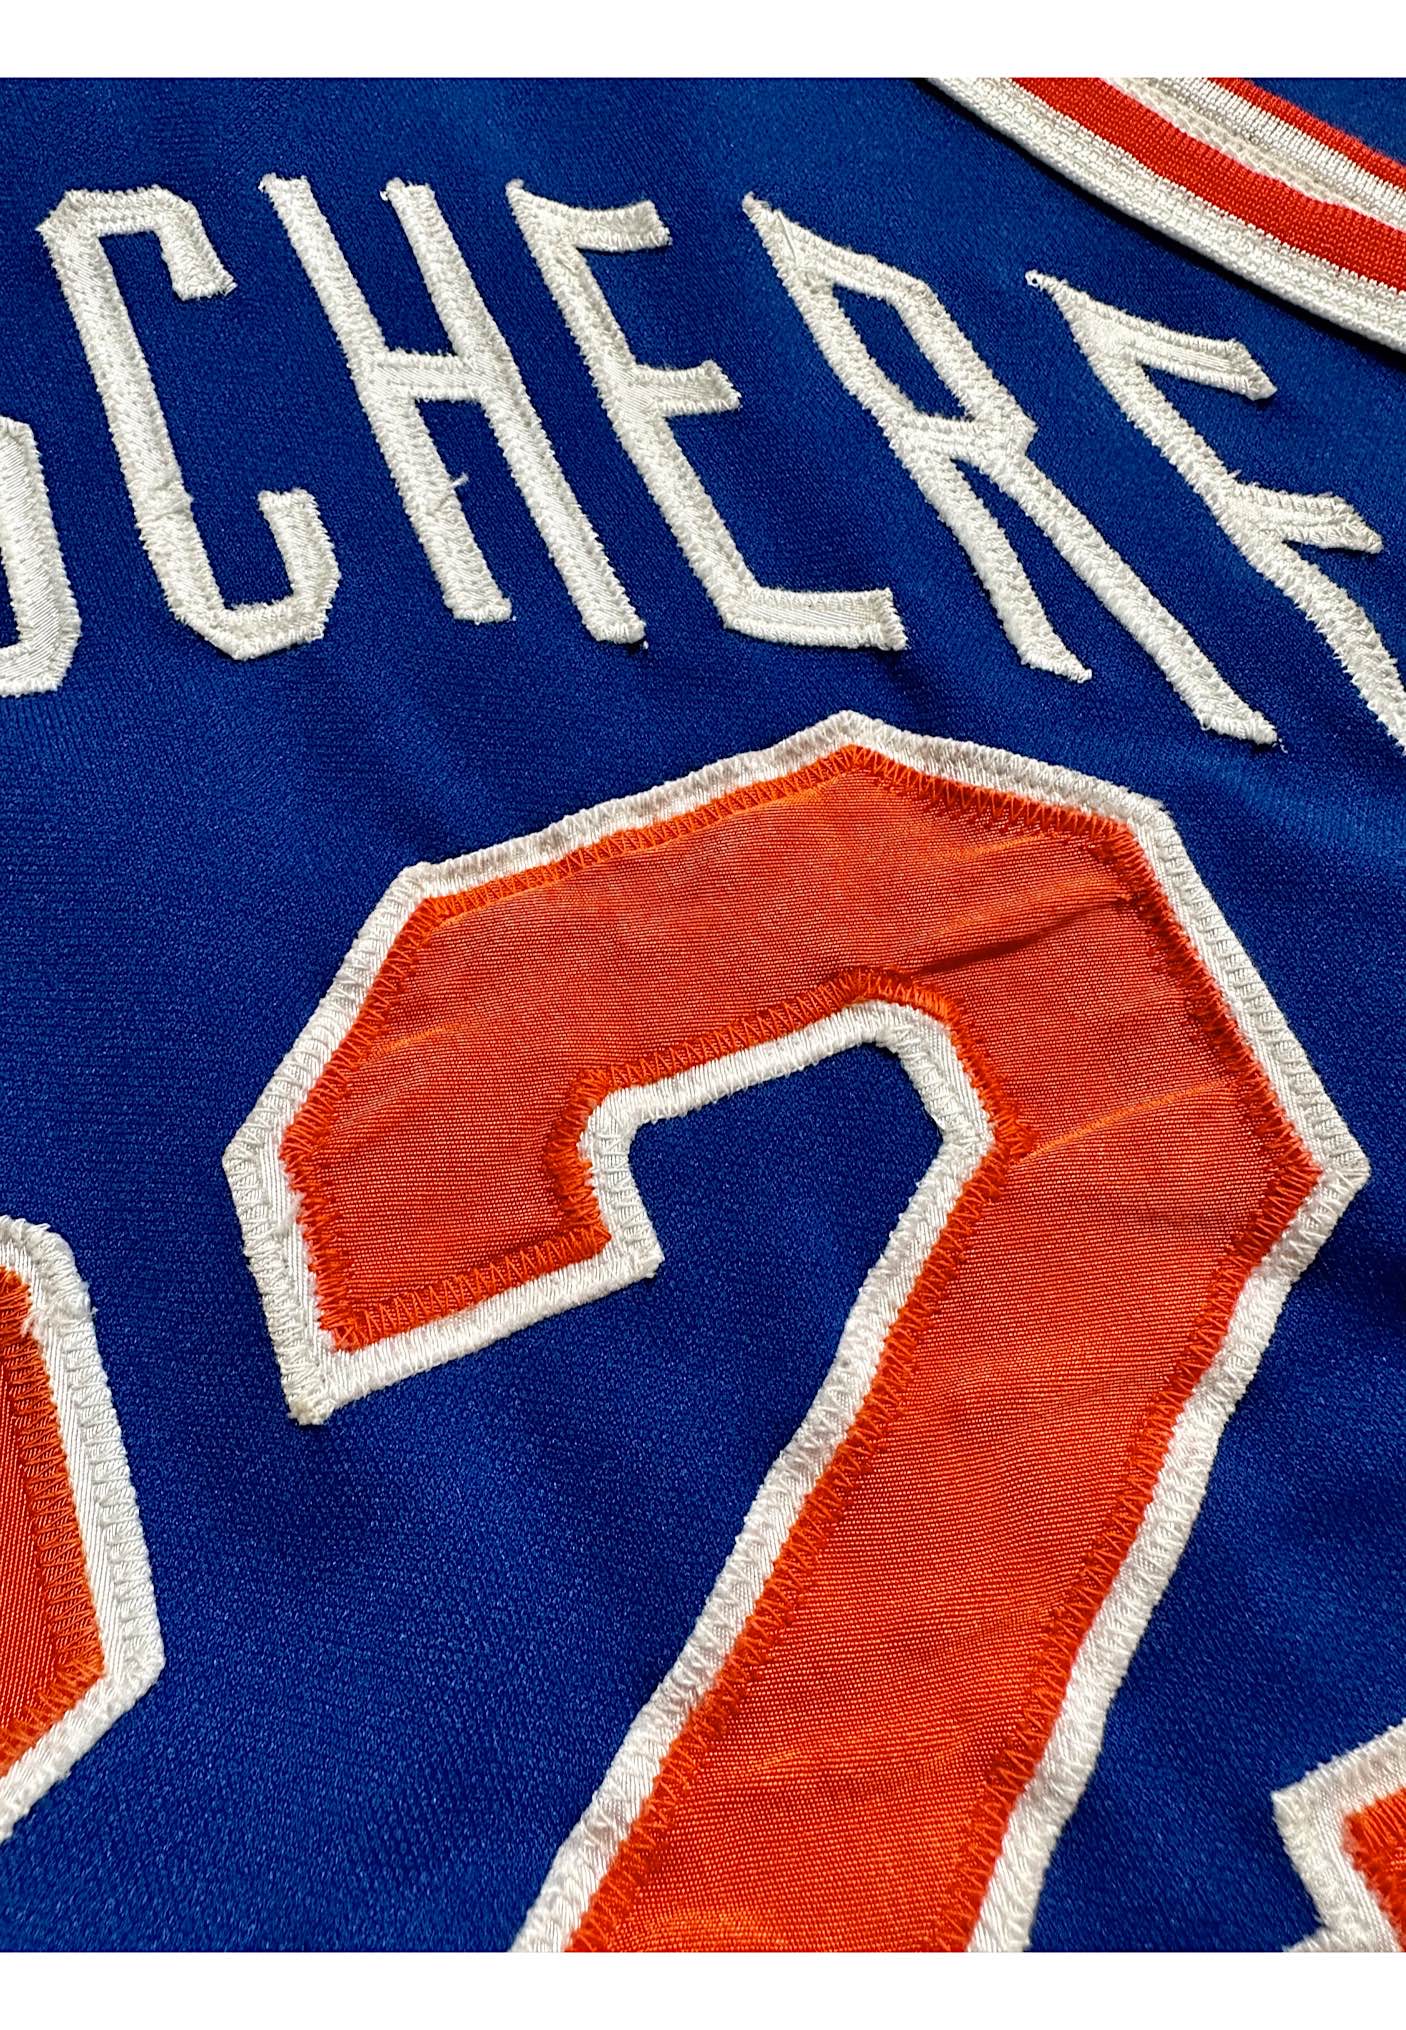 Lot Detail - Circa 1973 Dave DeBusschere NY Knicks Game-Used Jersey (Rare)